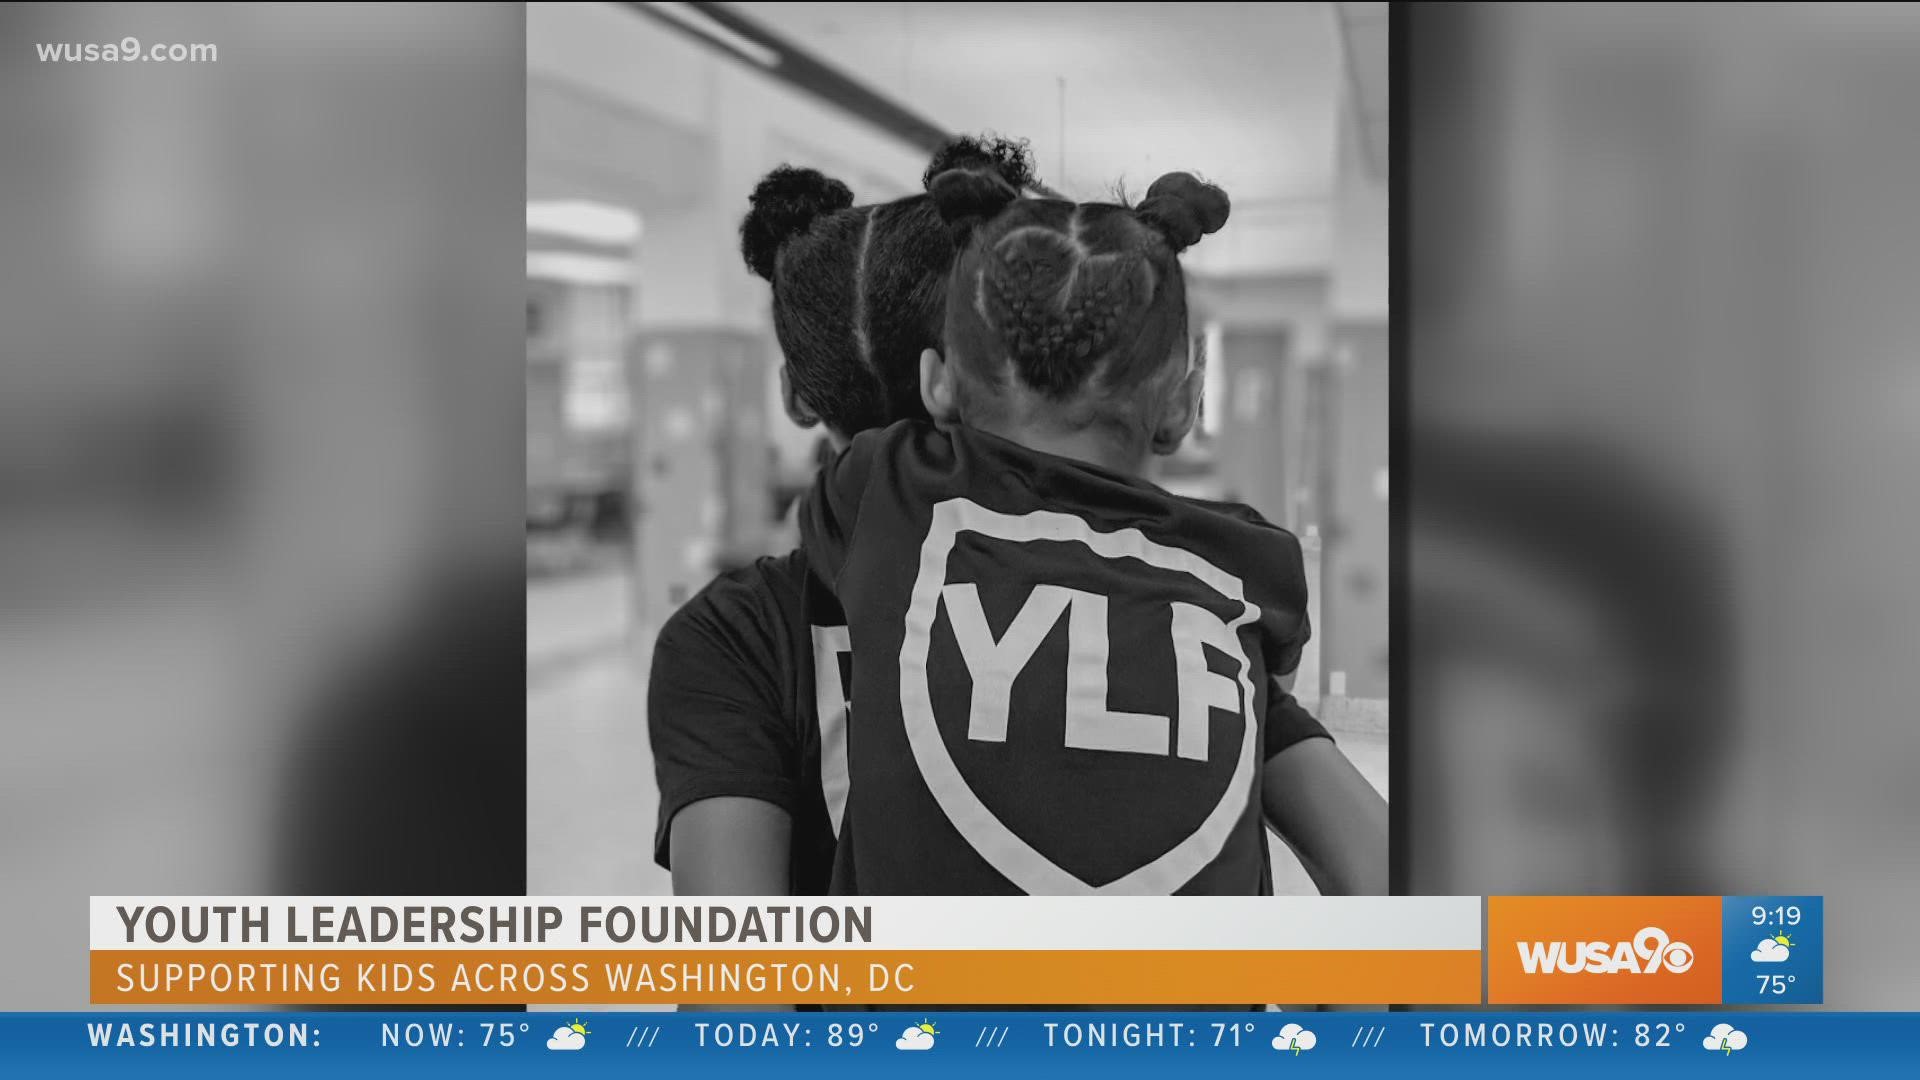 YLF provides mentorship to kids in the Washington, DC area. Exec. Director, Janaiha Bennett, explains how you can help, too!